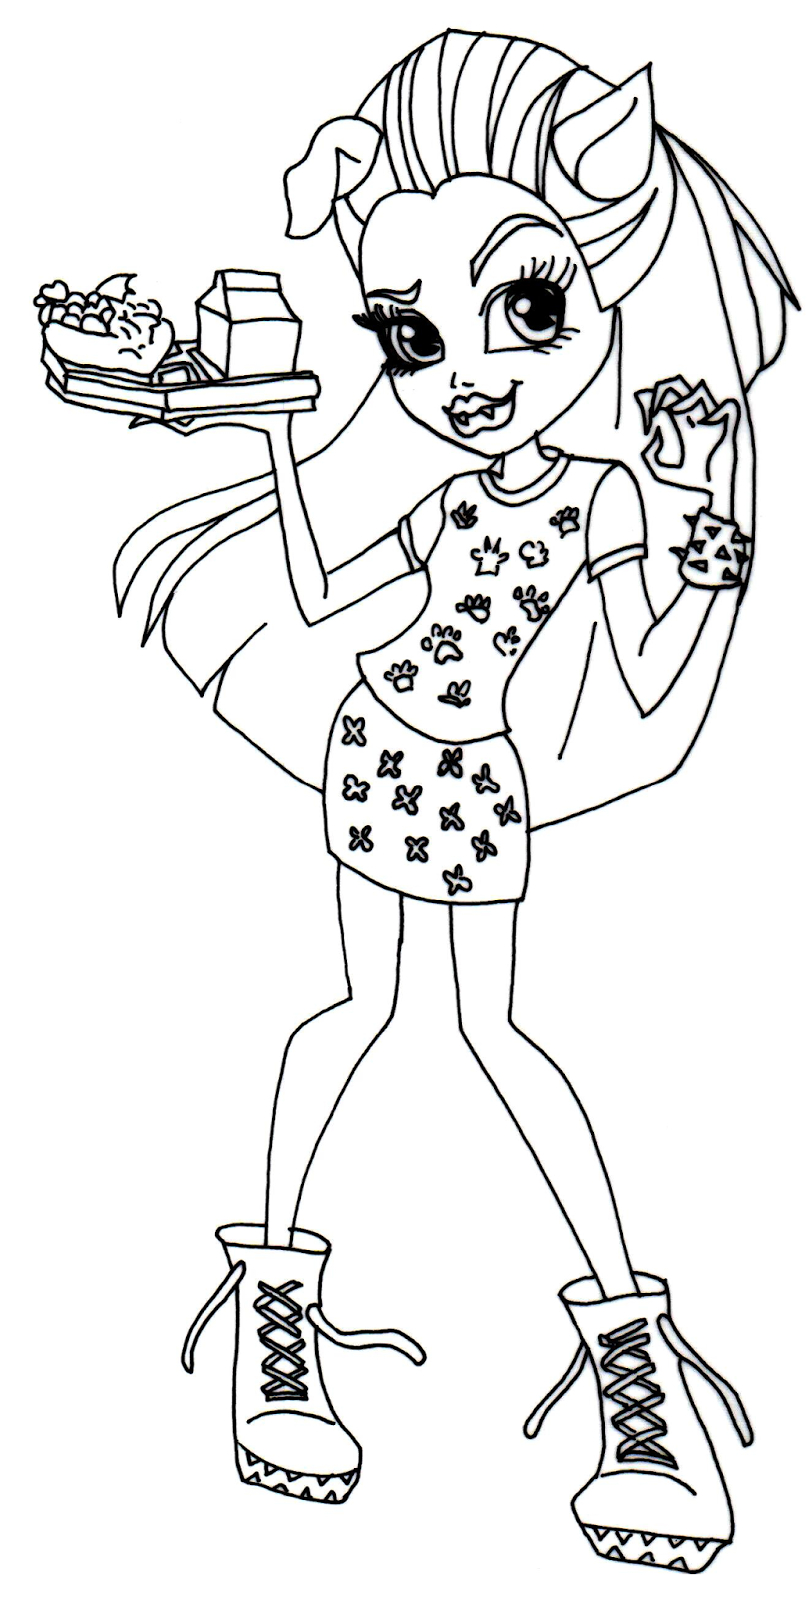 Free Printable Monster High Coloring Pages: June 2014 concernant Coloriages Monster High 